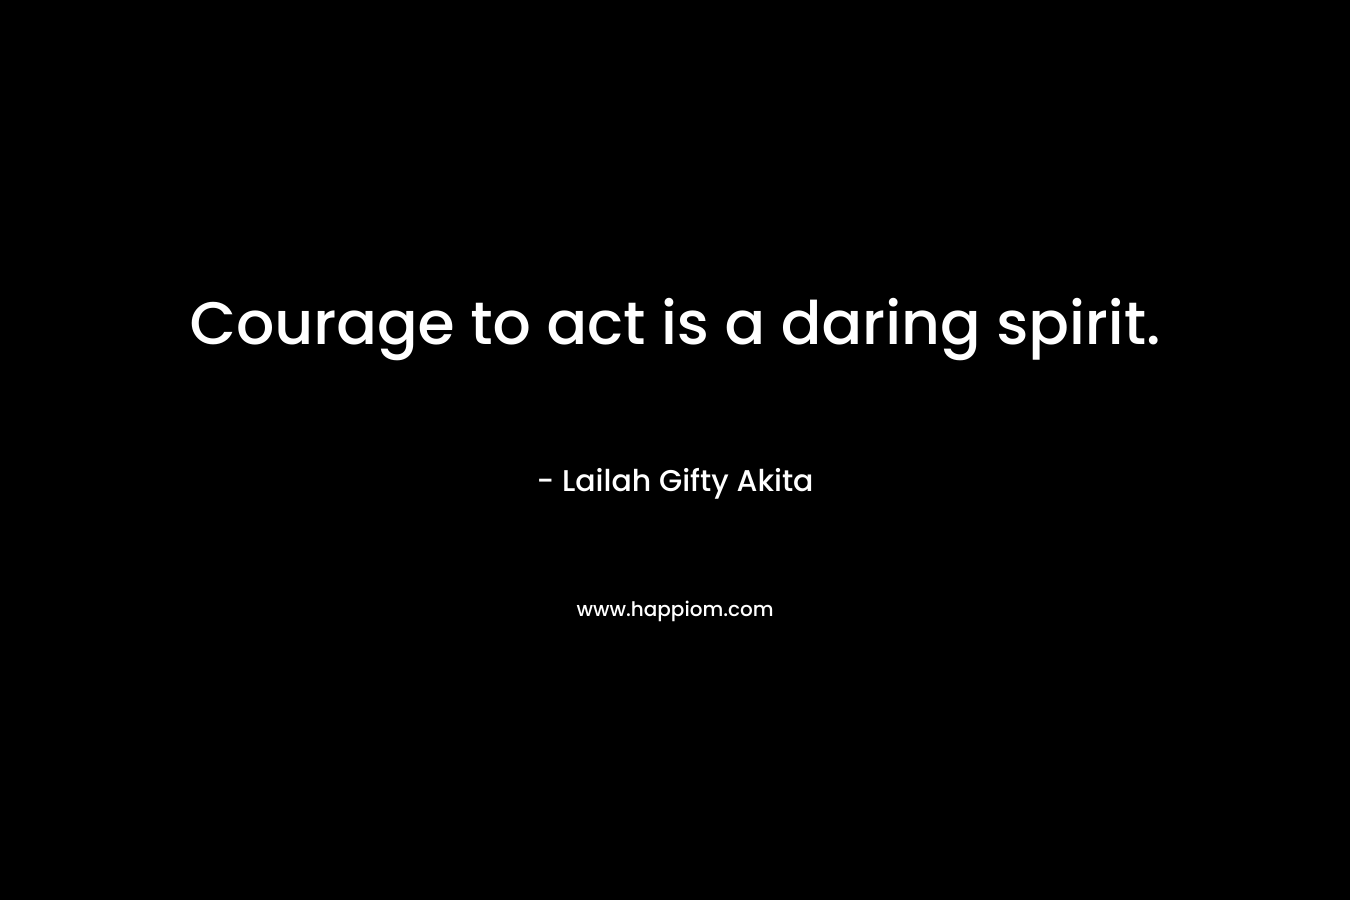 Courage to act is a daring spirit.